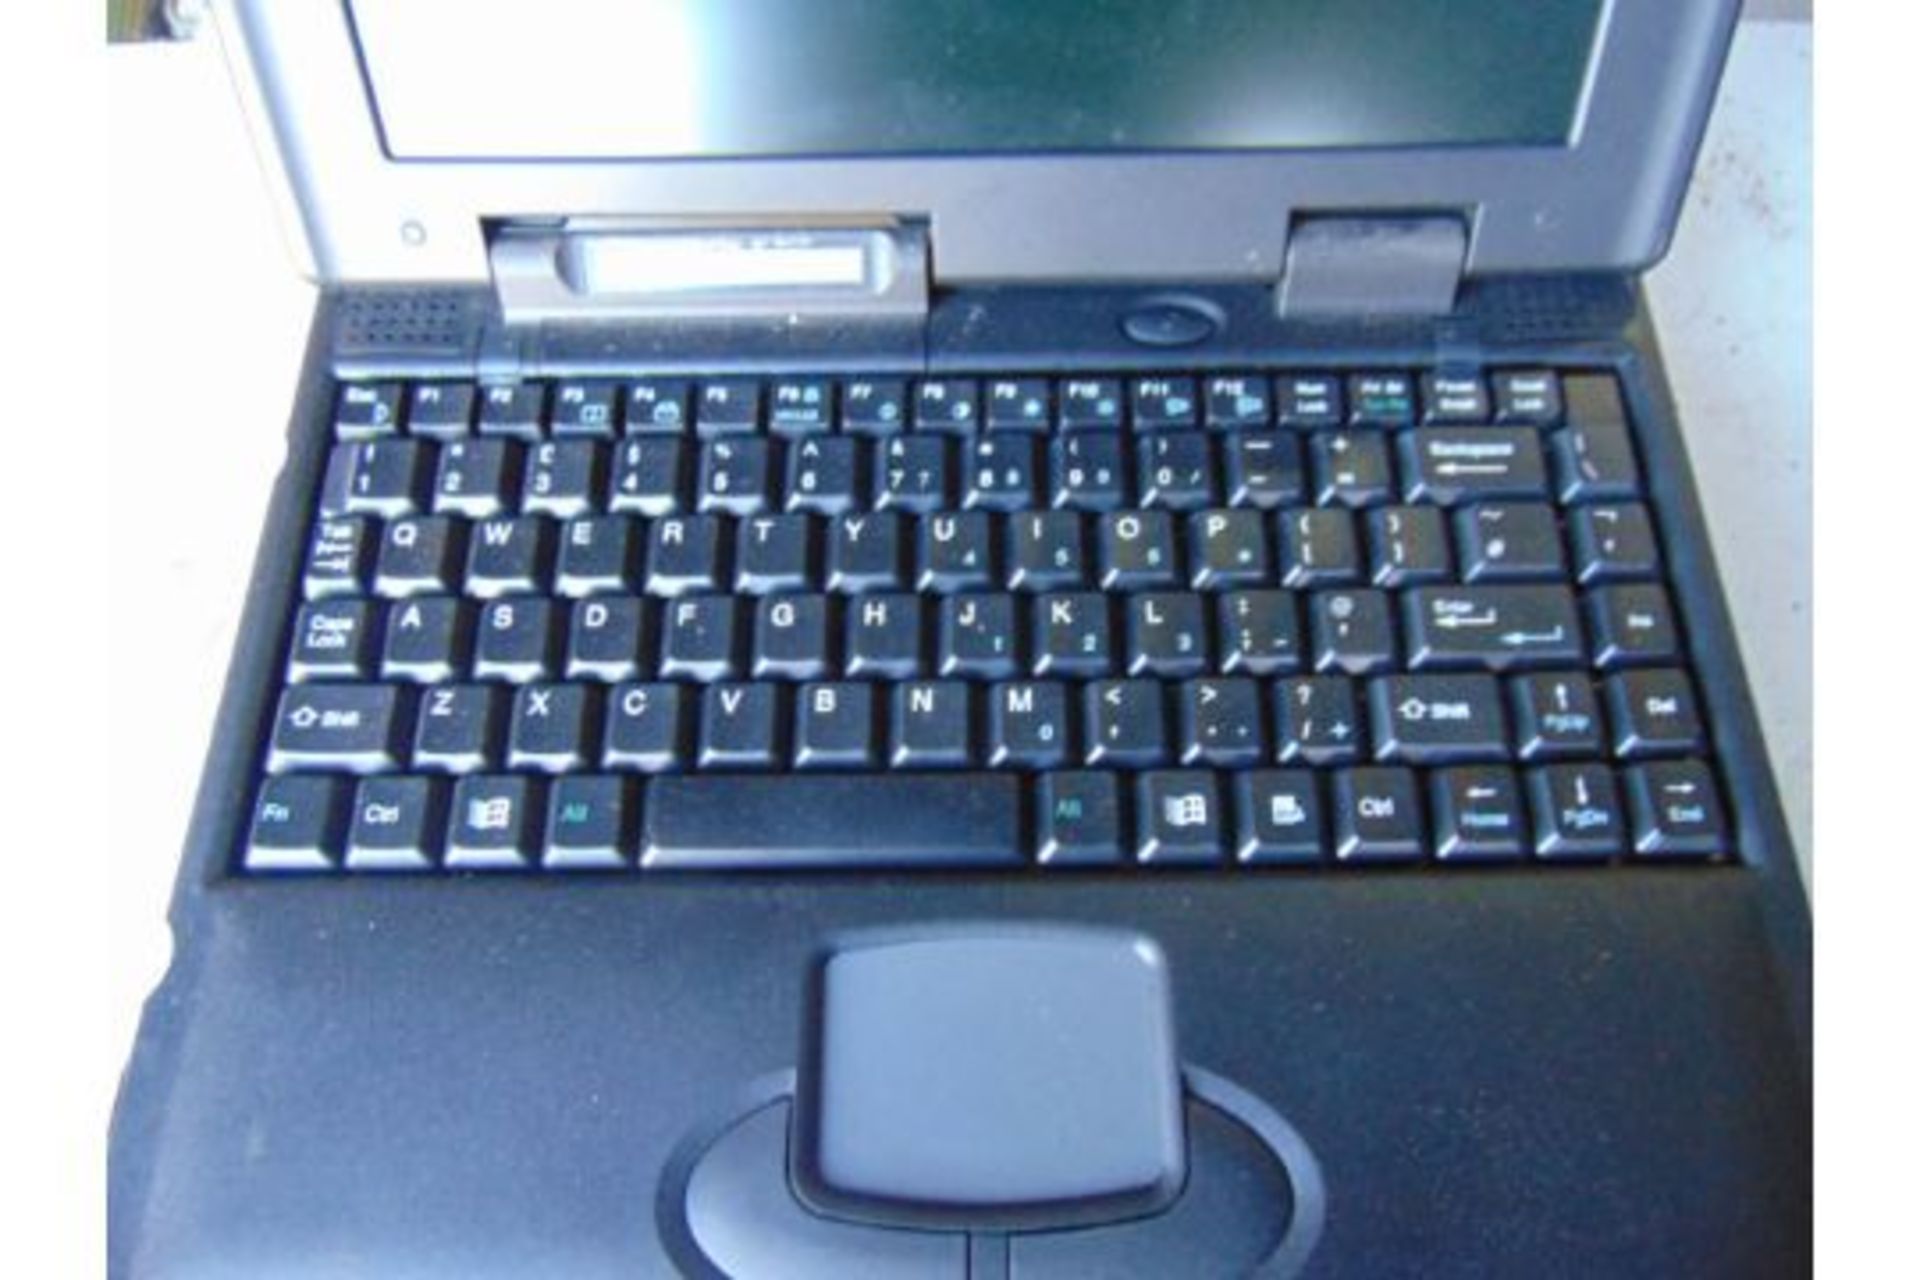 Compaq Notebook Laptop Computer - Image 2 of 2